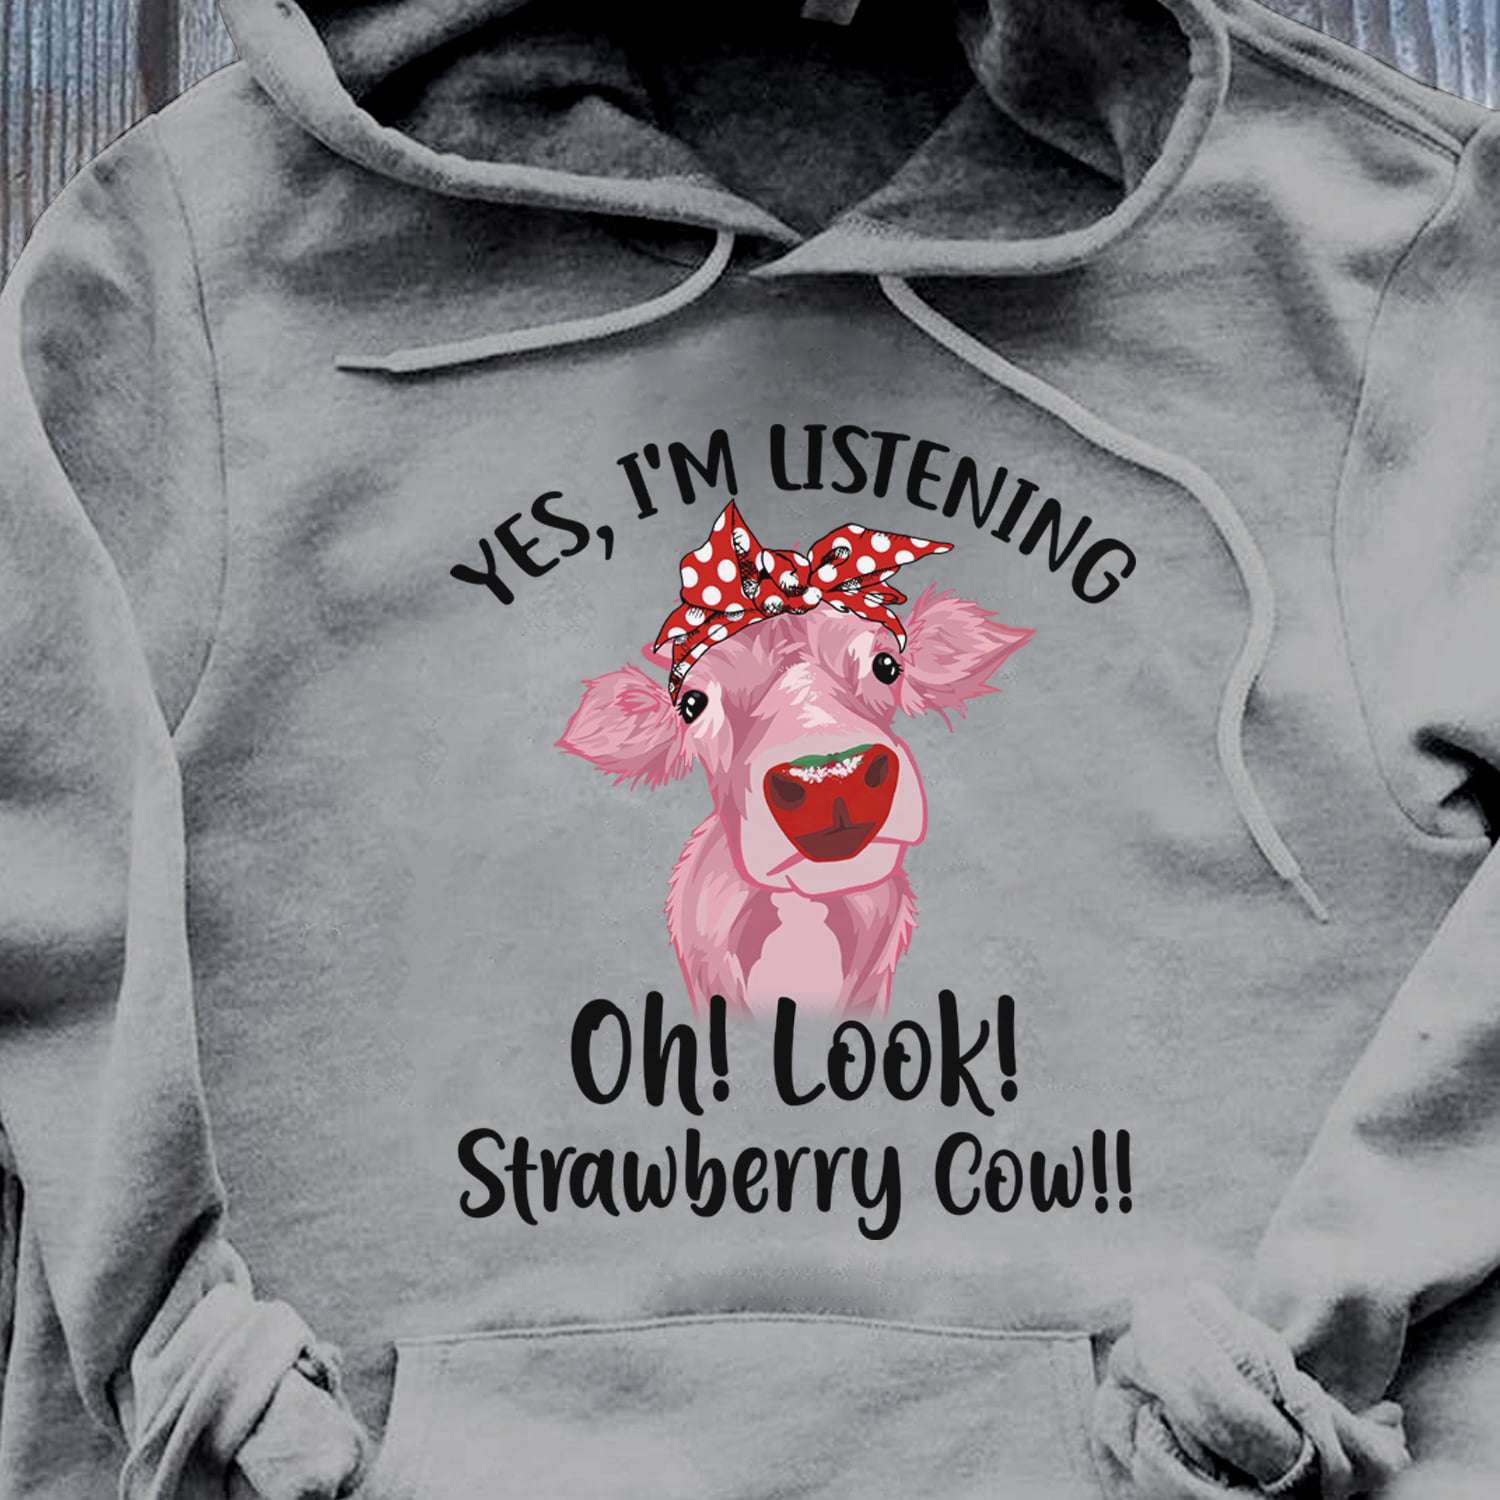 Yes, I'm listening - Oh look! Strawberry cow, strawberry pink cow